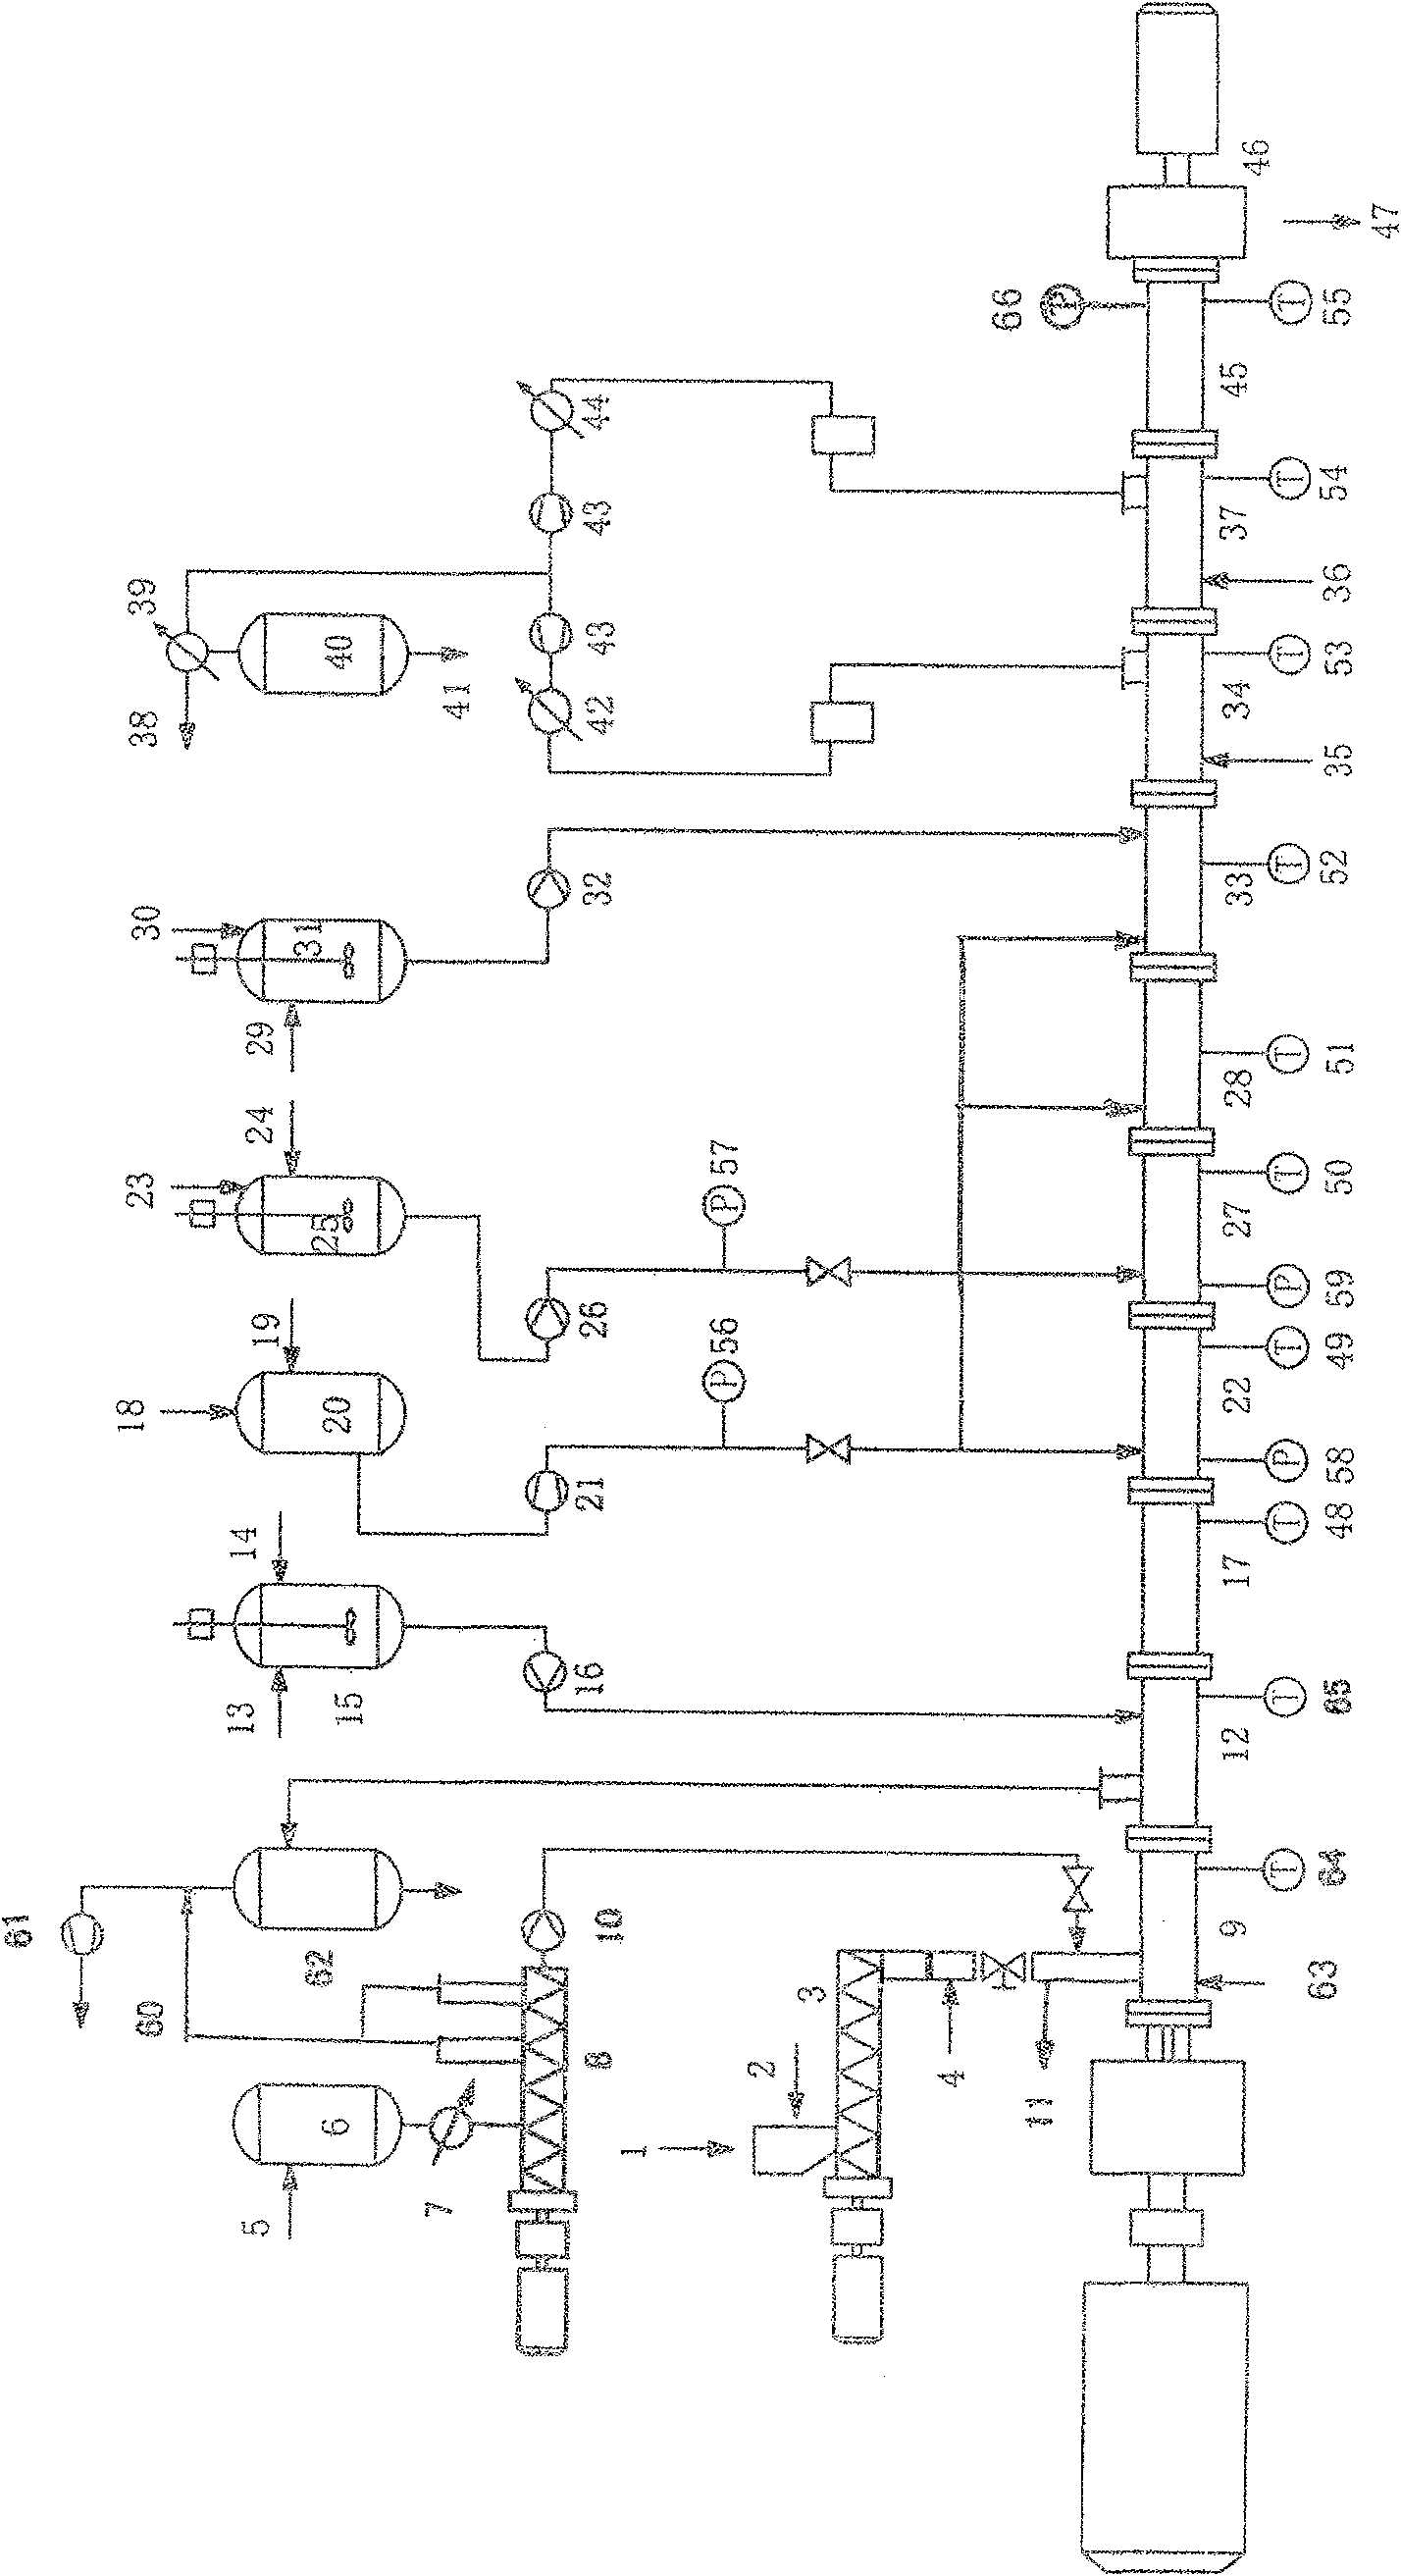 Method of manufacturing halogenated rubber like polymer